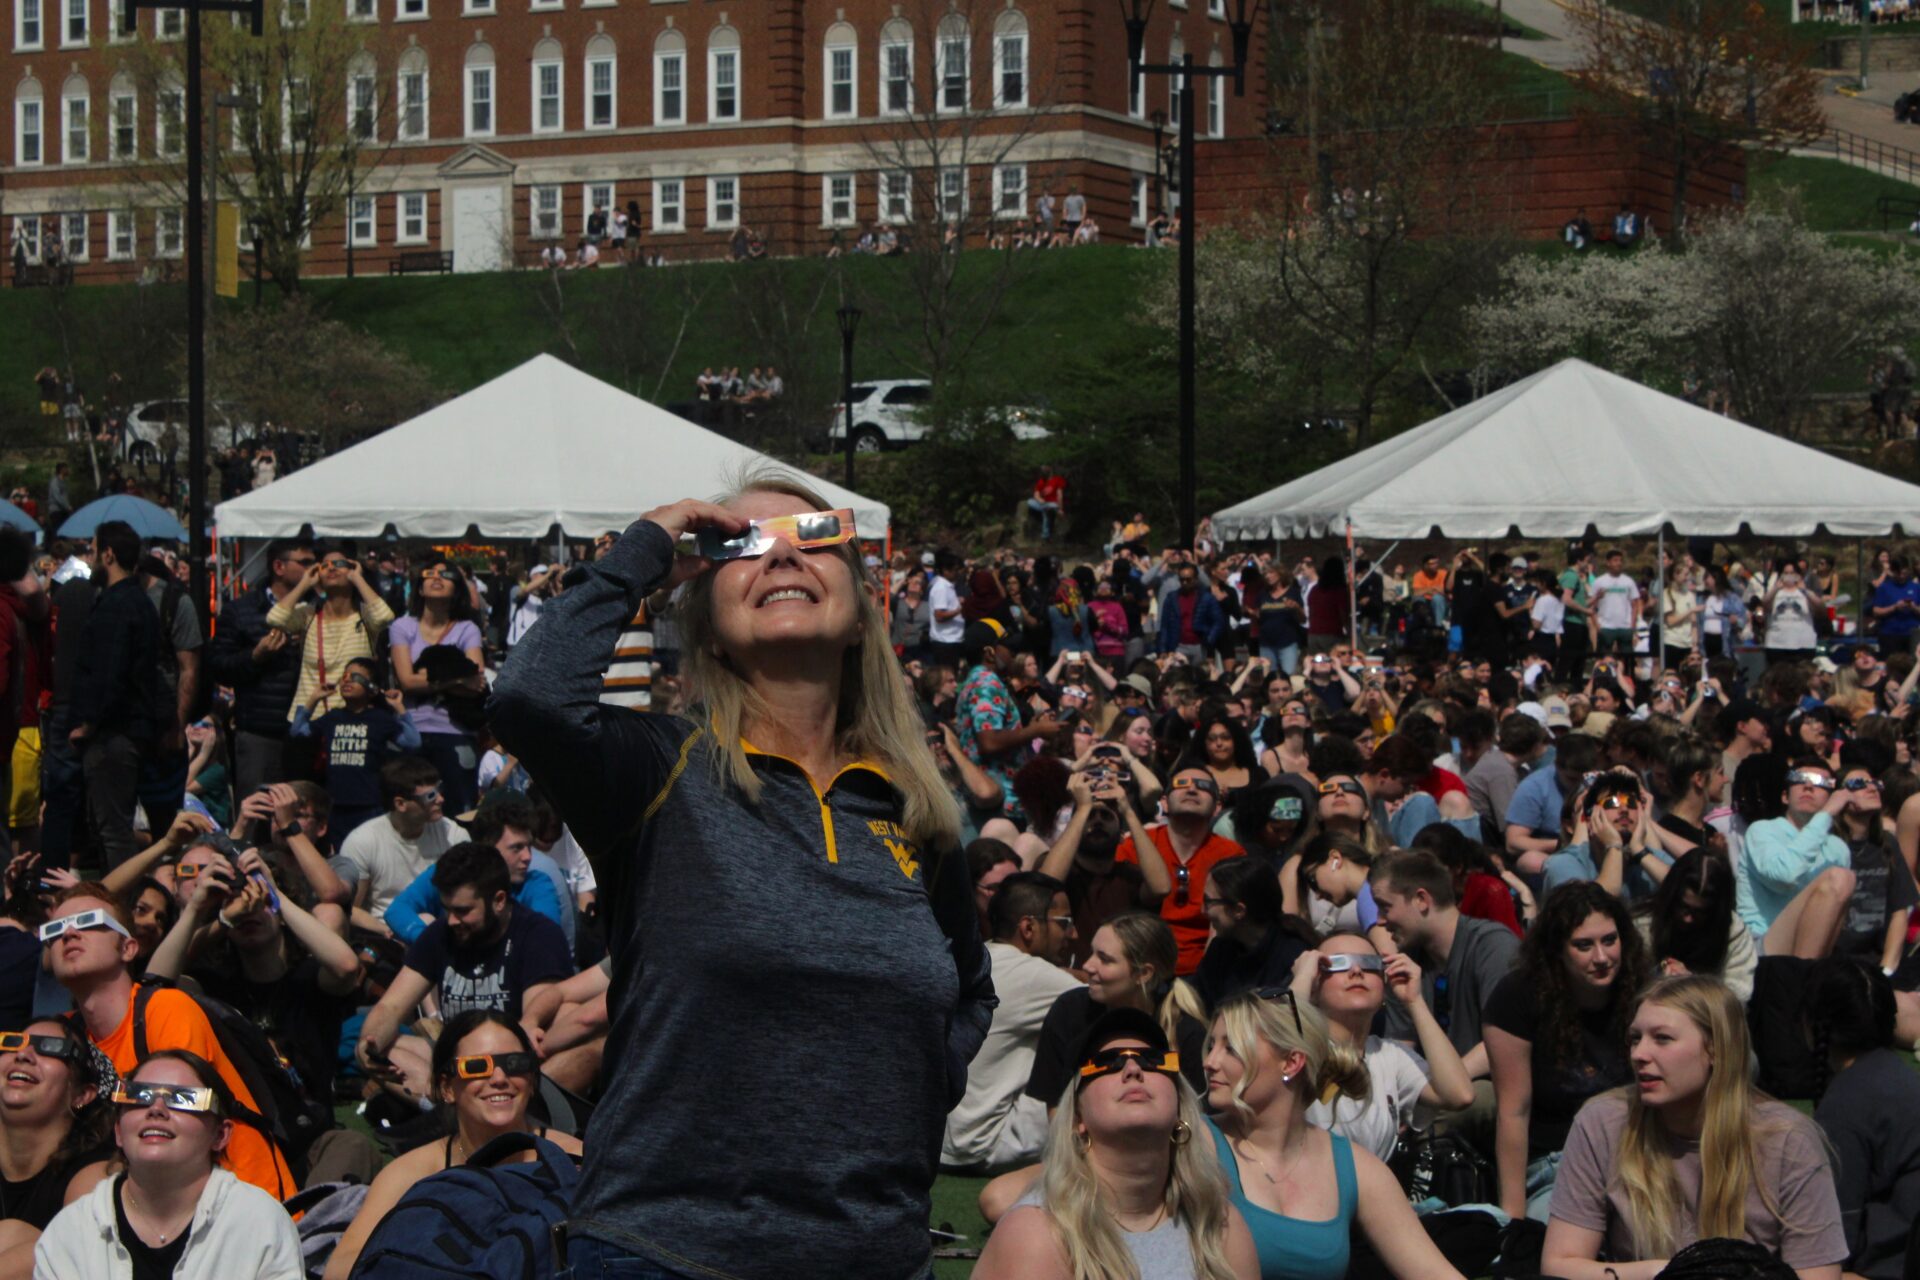 A blonde woman wearing eclipse glasses and smiling stands amidst a crowd sitting on a green. She wears a grey quarter zip sweater with a "flying WV" logo visible on the right of the sweater's chest. The crowd spreads behind her until a grassy hill rises towards a red brick building.